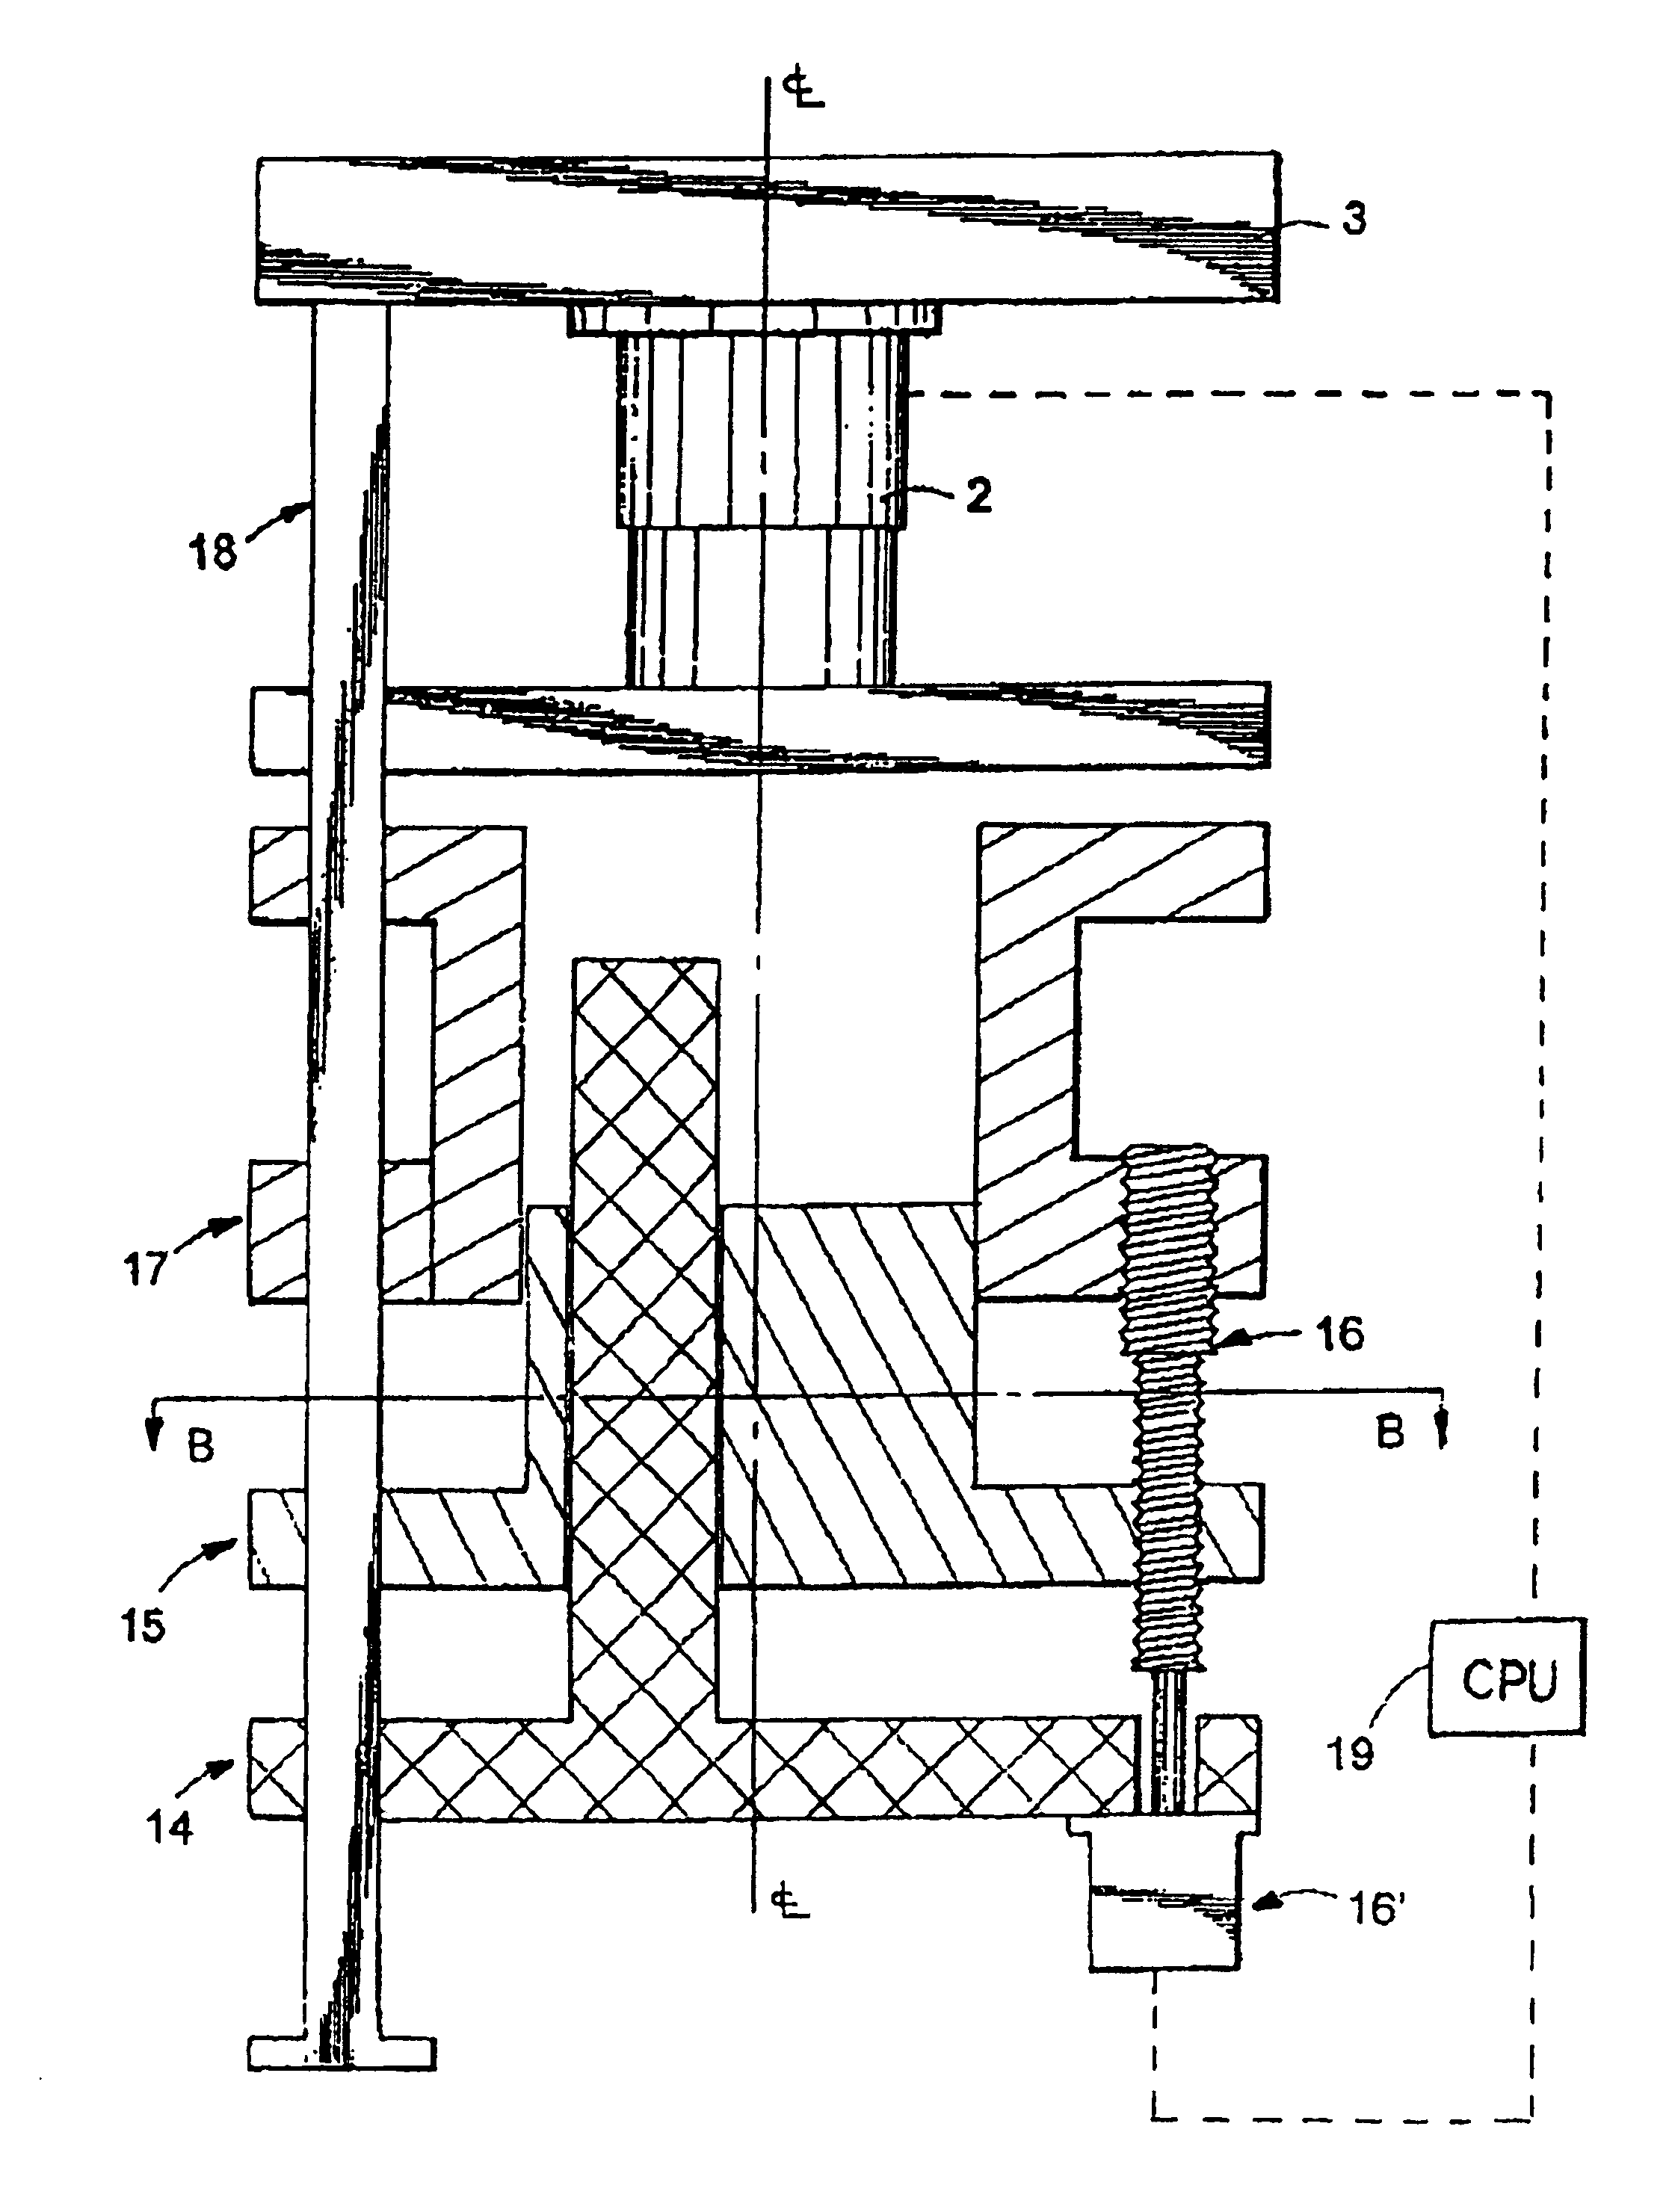 Method and apparatus for producing non-planar formed parts using compaction molding compounds, and parts formed using same